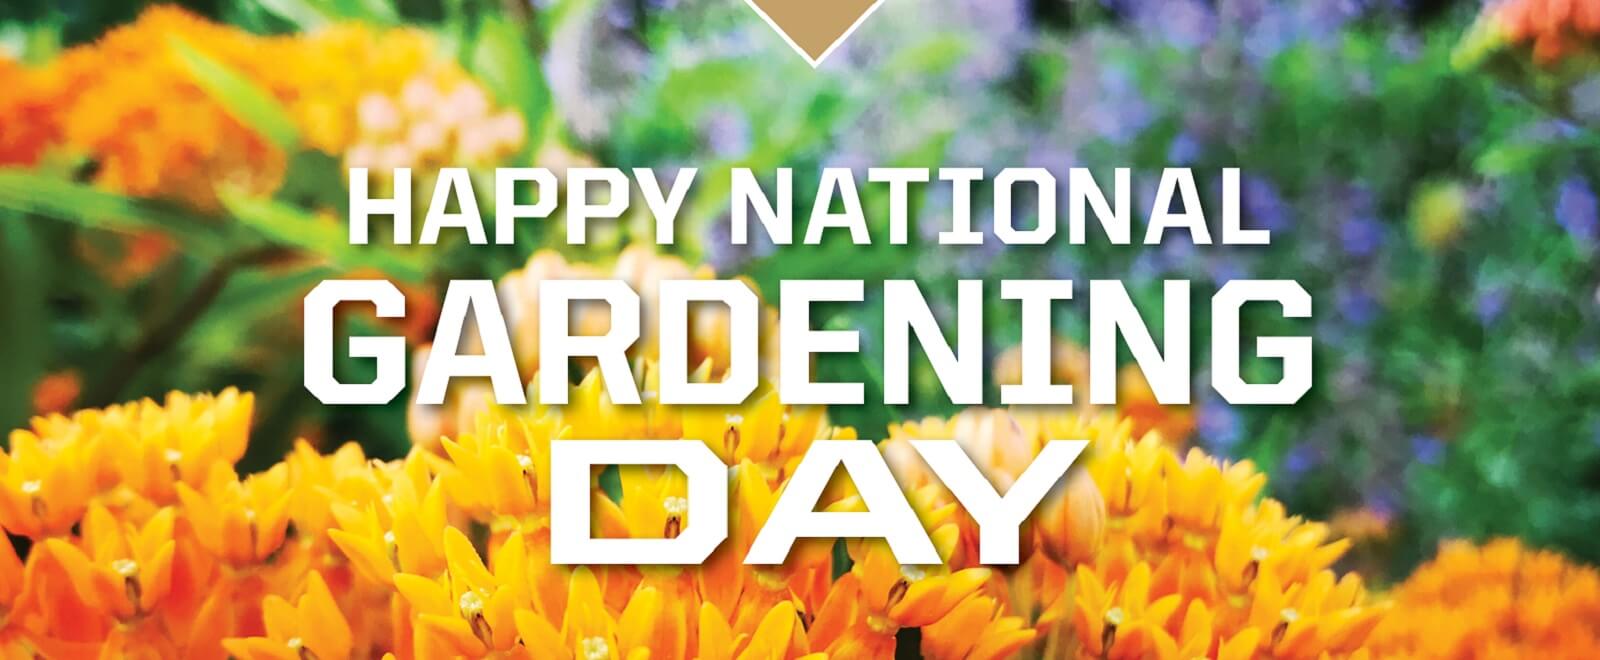 Yellow and purple flowers with white caption letters  Happy National Gardening Day